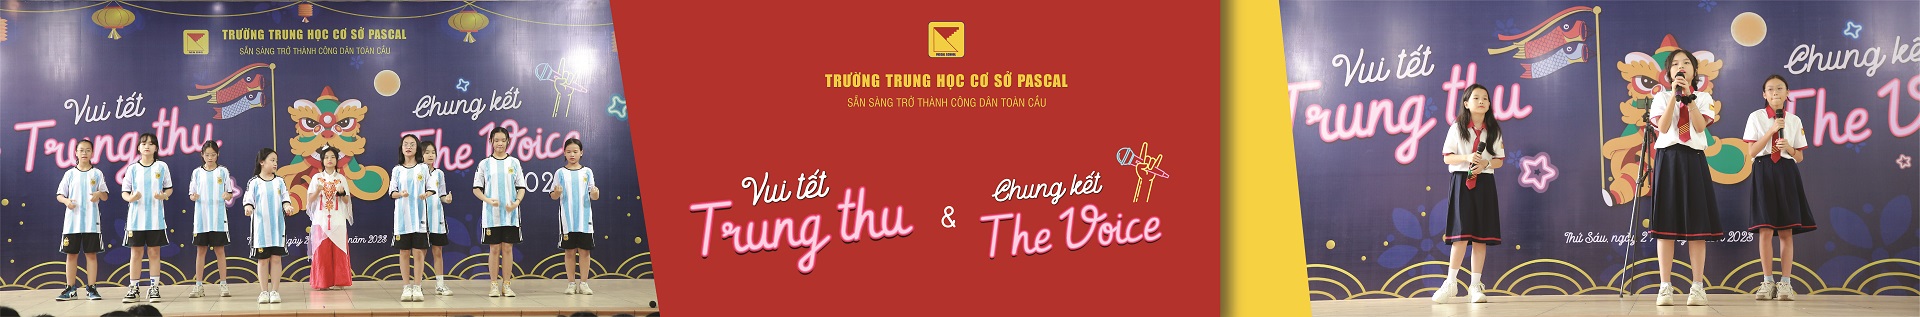 Trung thu - The Voice